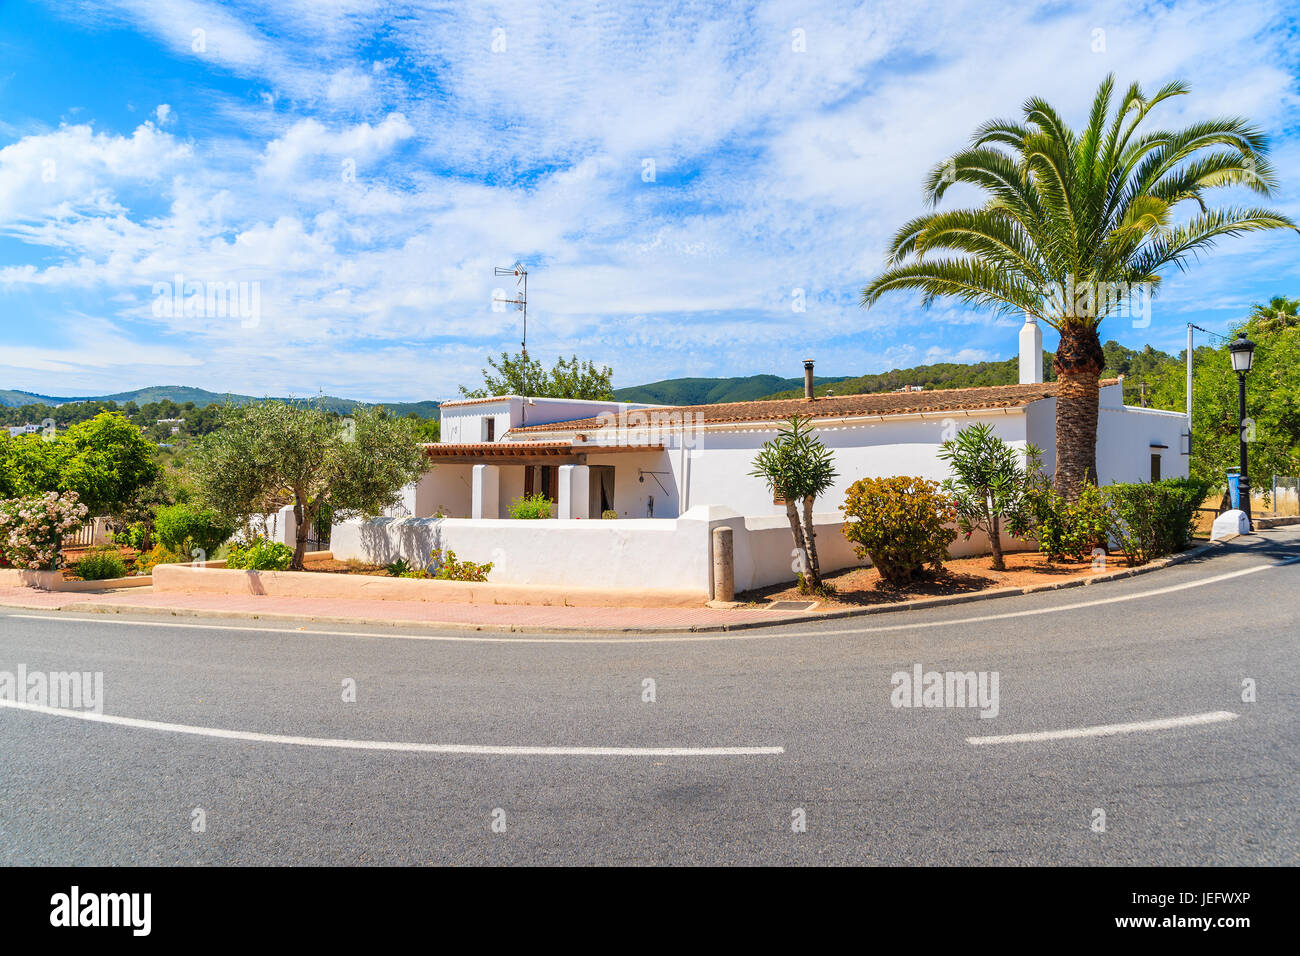 Typical white house with palm tree on side of a road in Sant Carles de Peralta village, Ibiza island, Spain Stock Photo